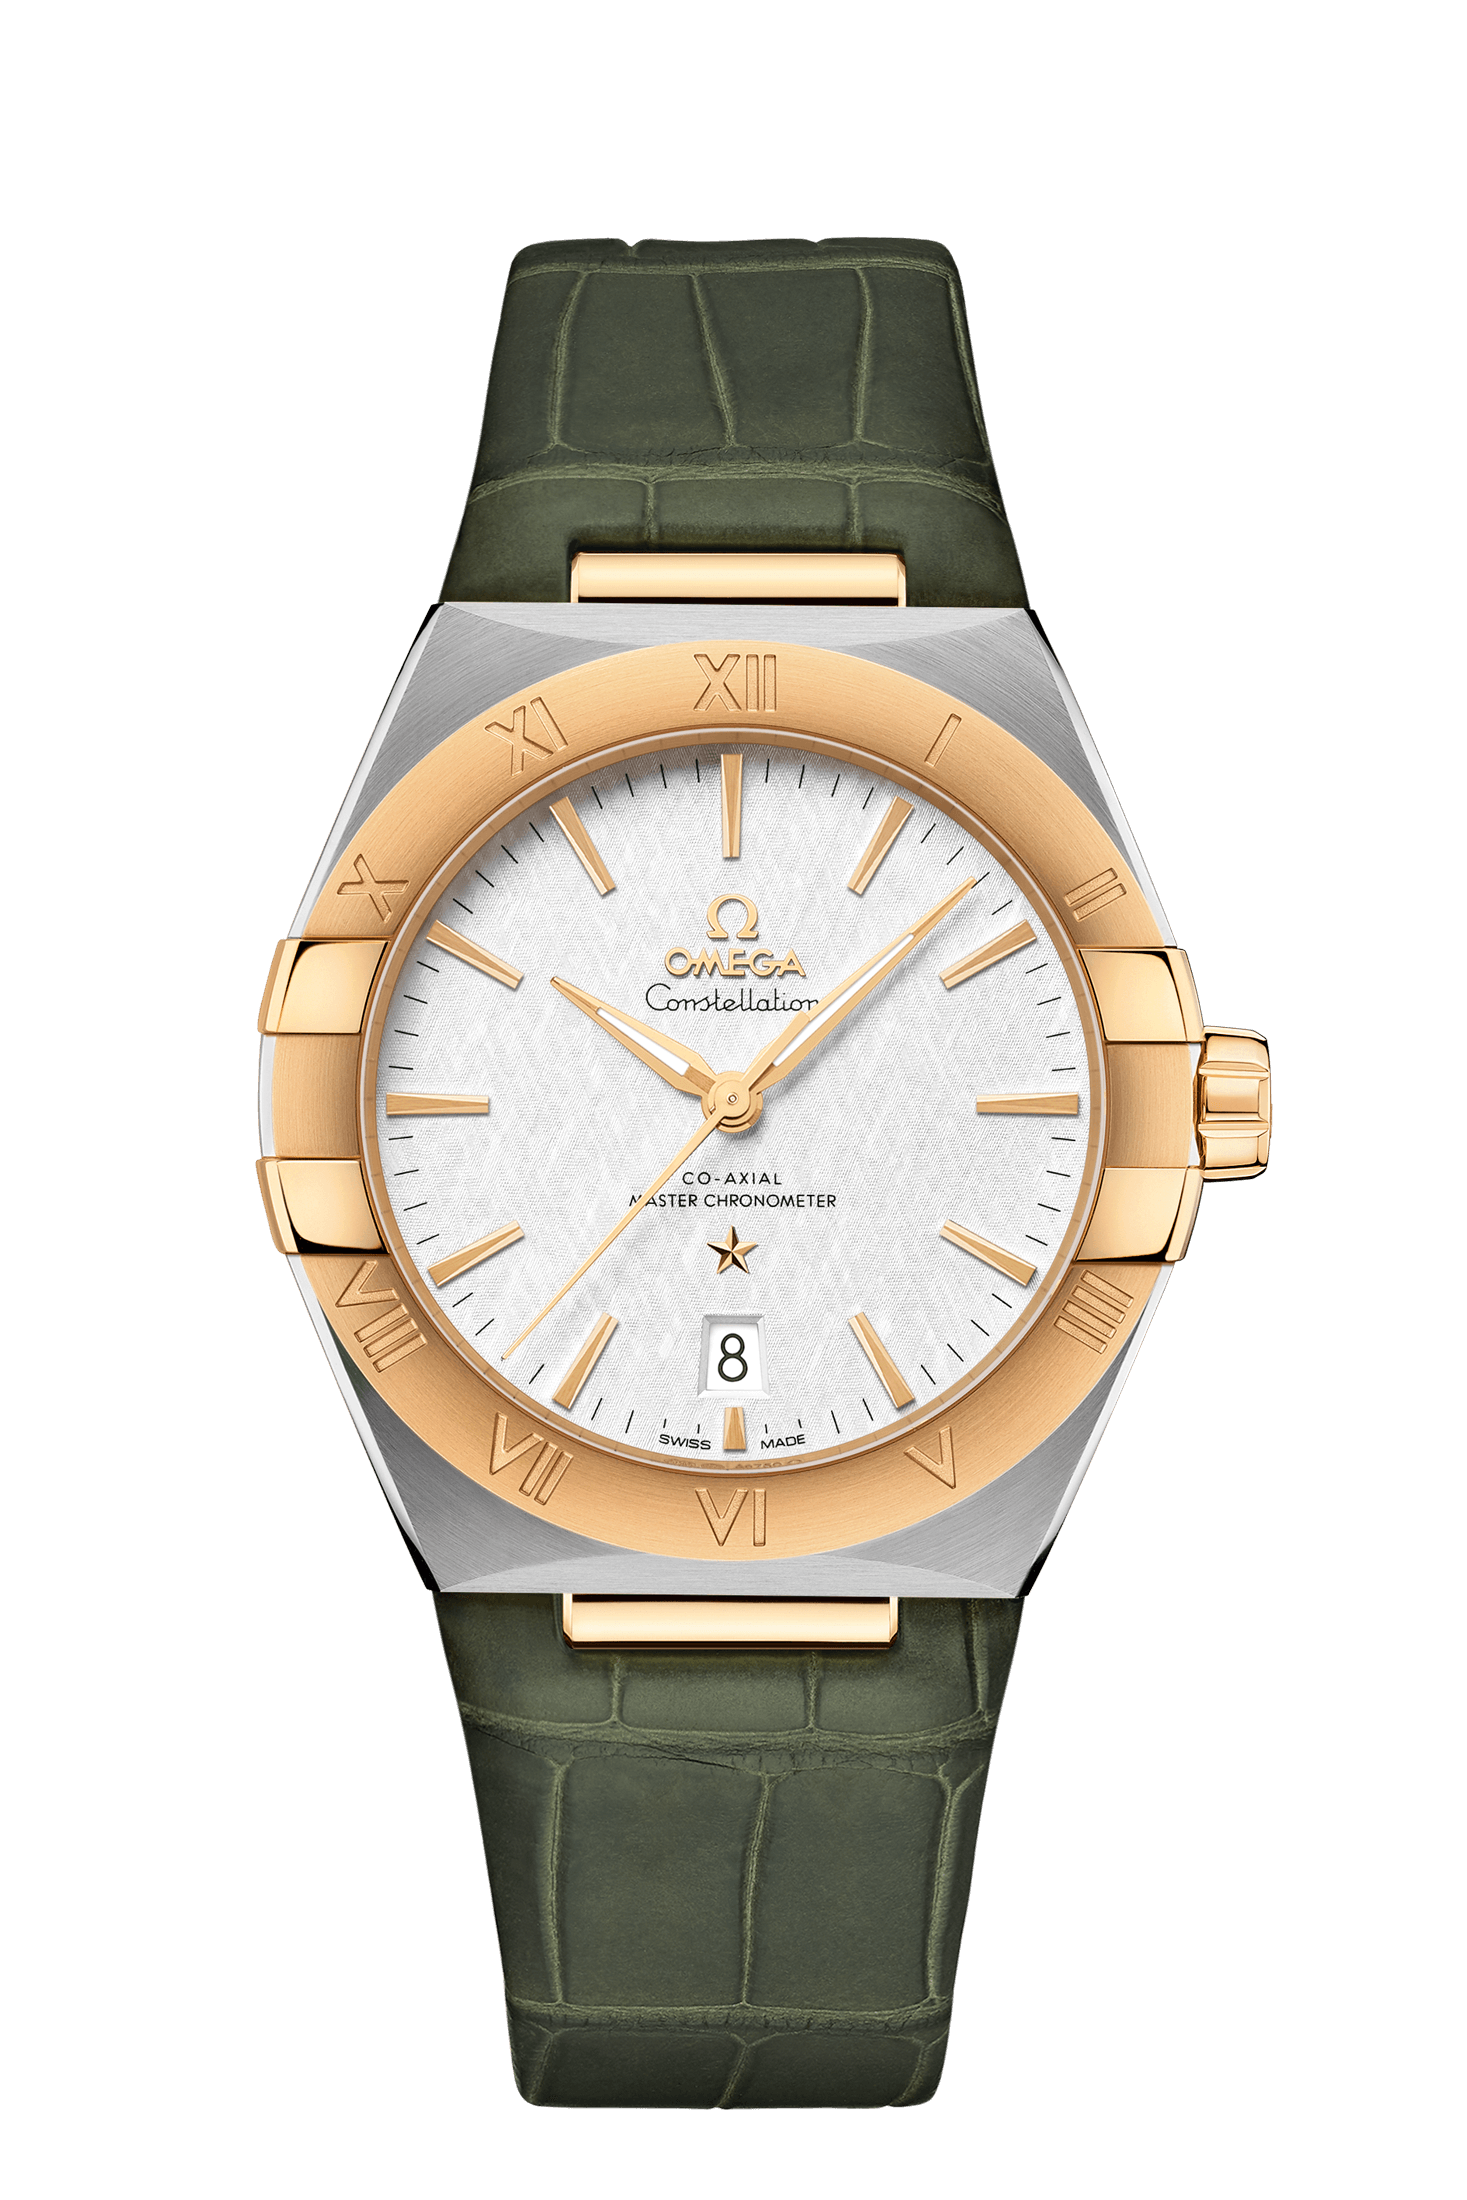 Men's watch / unisex  OMEGA, Constellation Co Axial Master Chronometer / 39mm, SKU: 131.23.39.20.02.002 | watchapproach.com